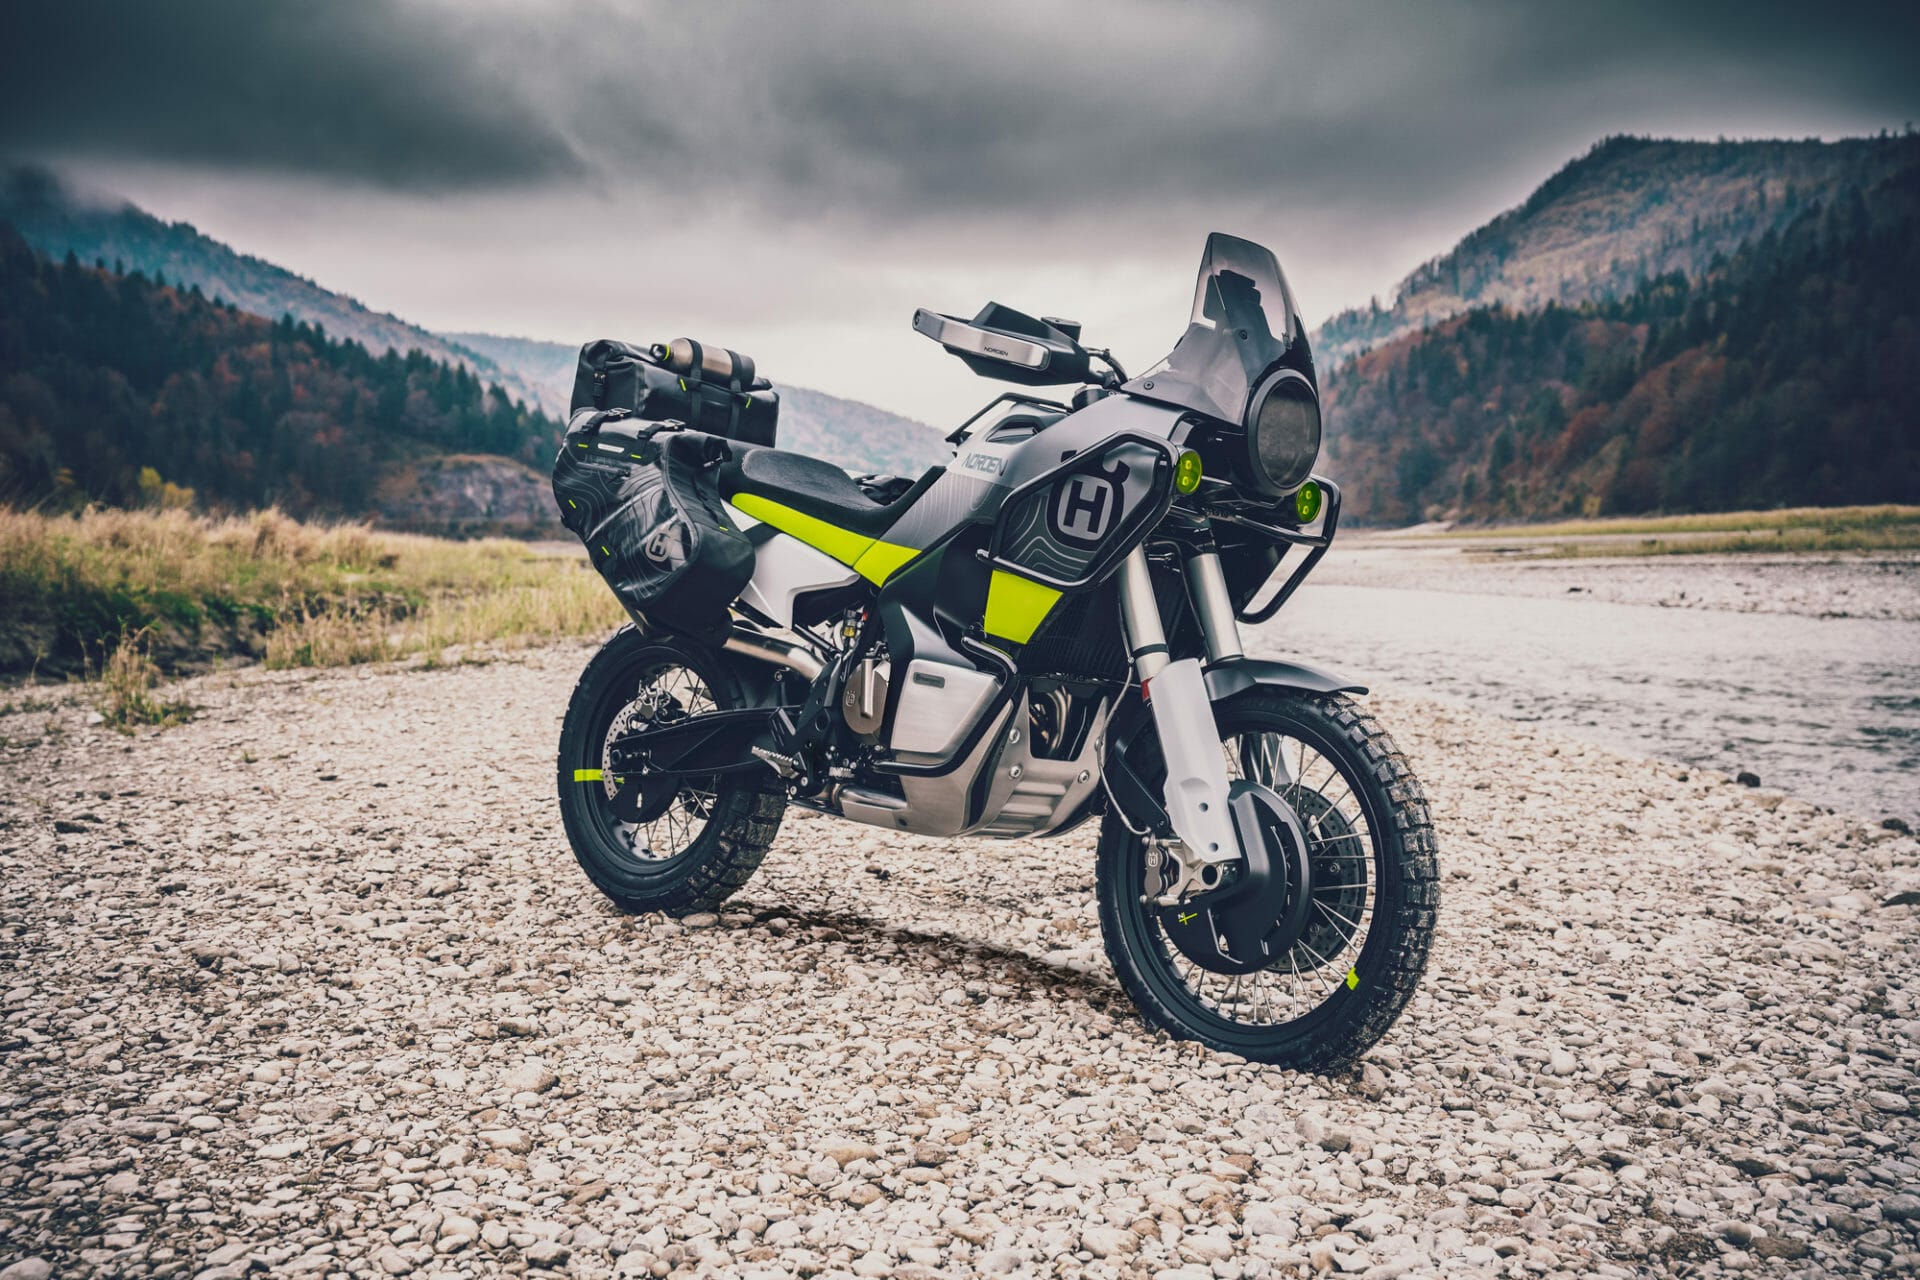 Husqvarna brings the Norden 901 Concept as a standard motorcycle
- also in the app Motorcycle News